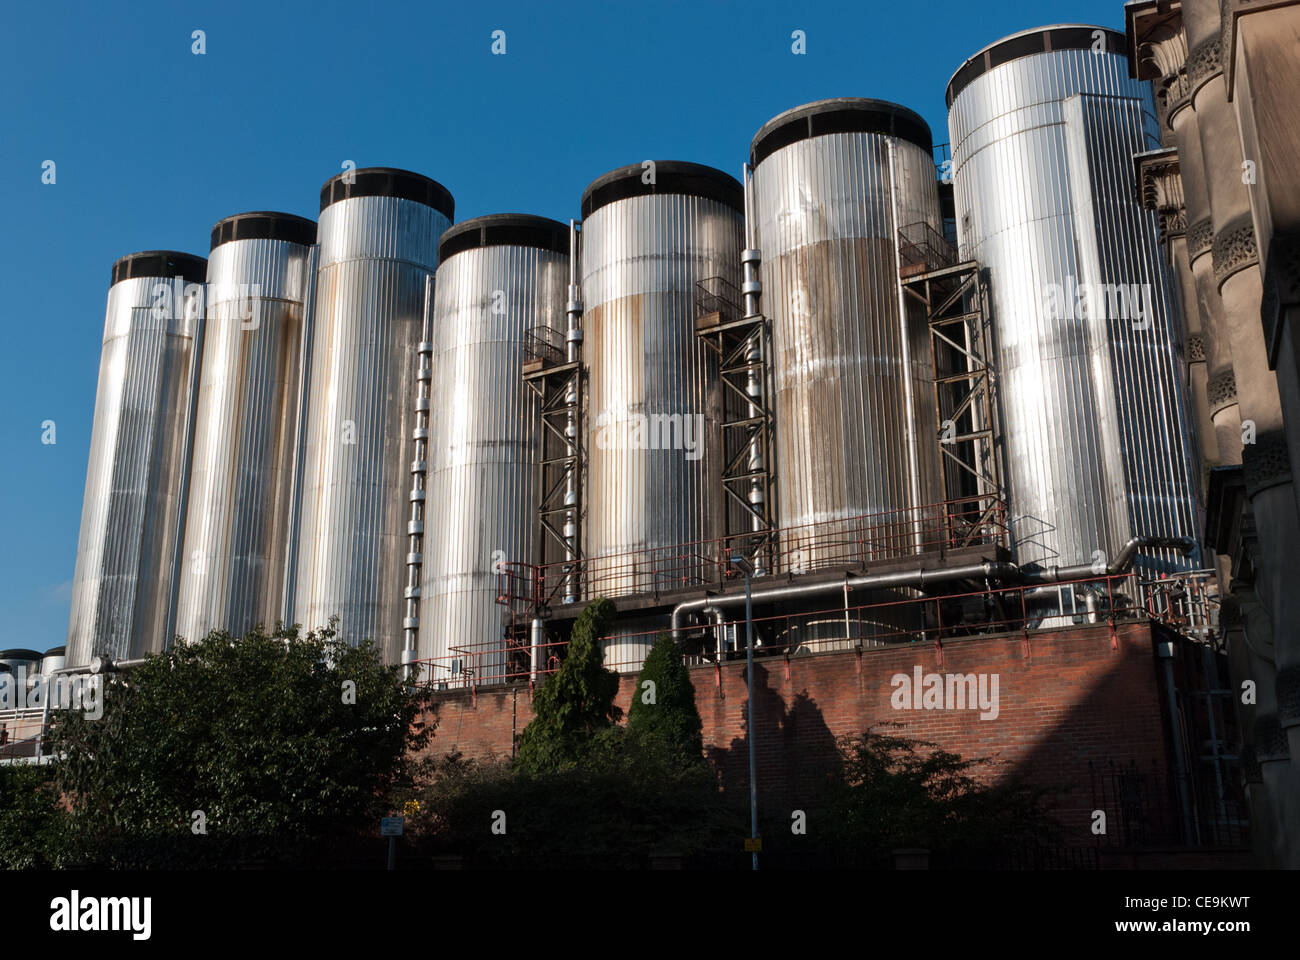 Storage tanks at the Coors brewery in George Street, Burton on Trent Stock Photo